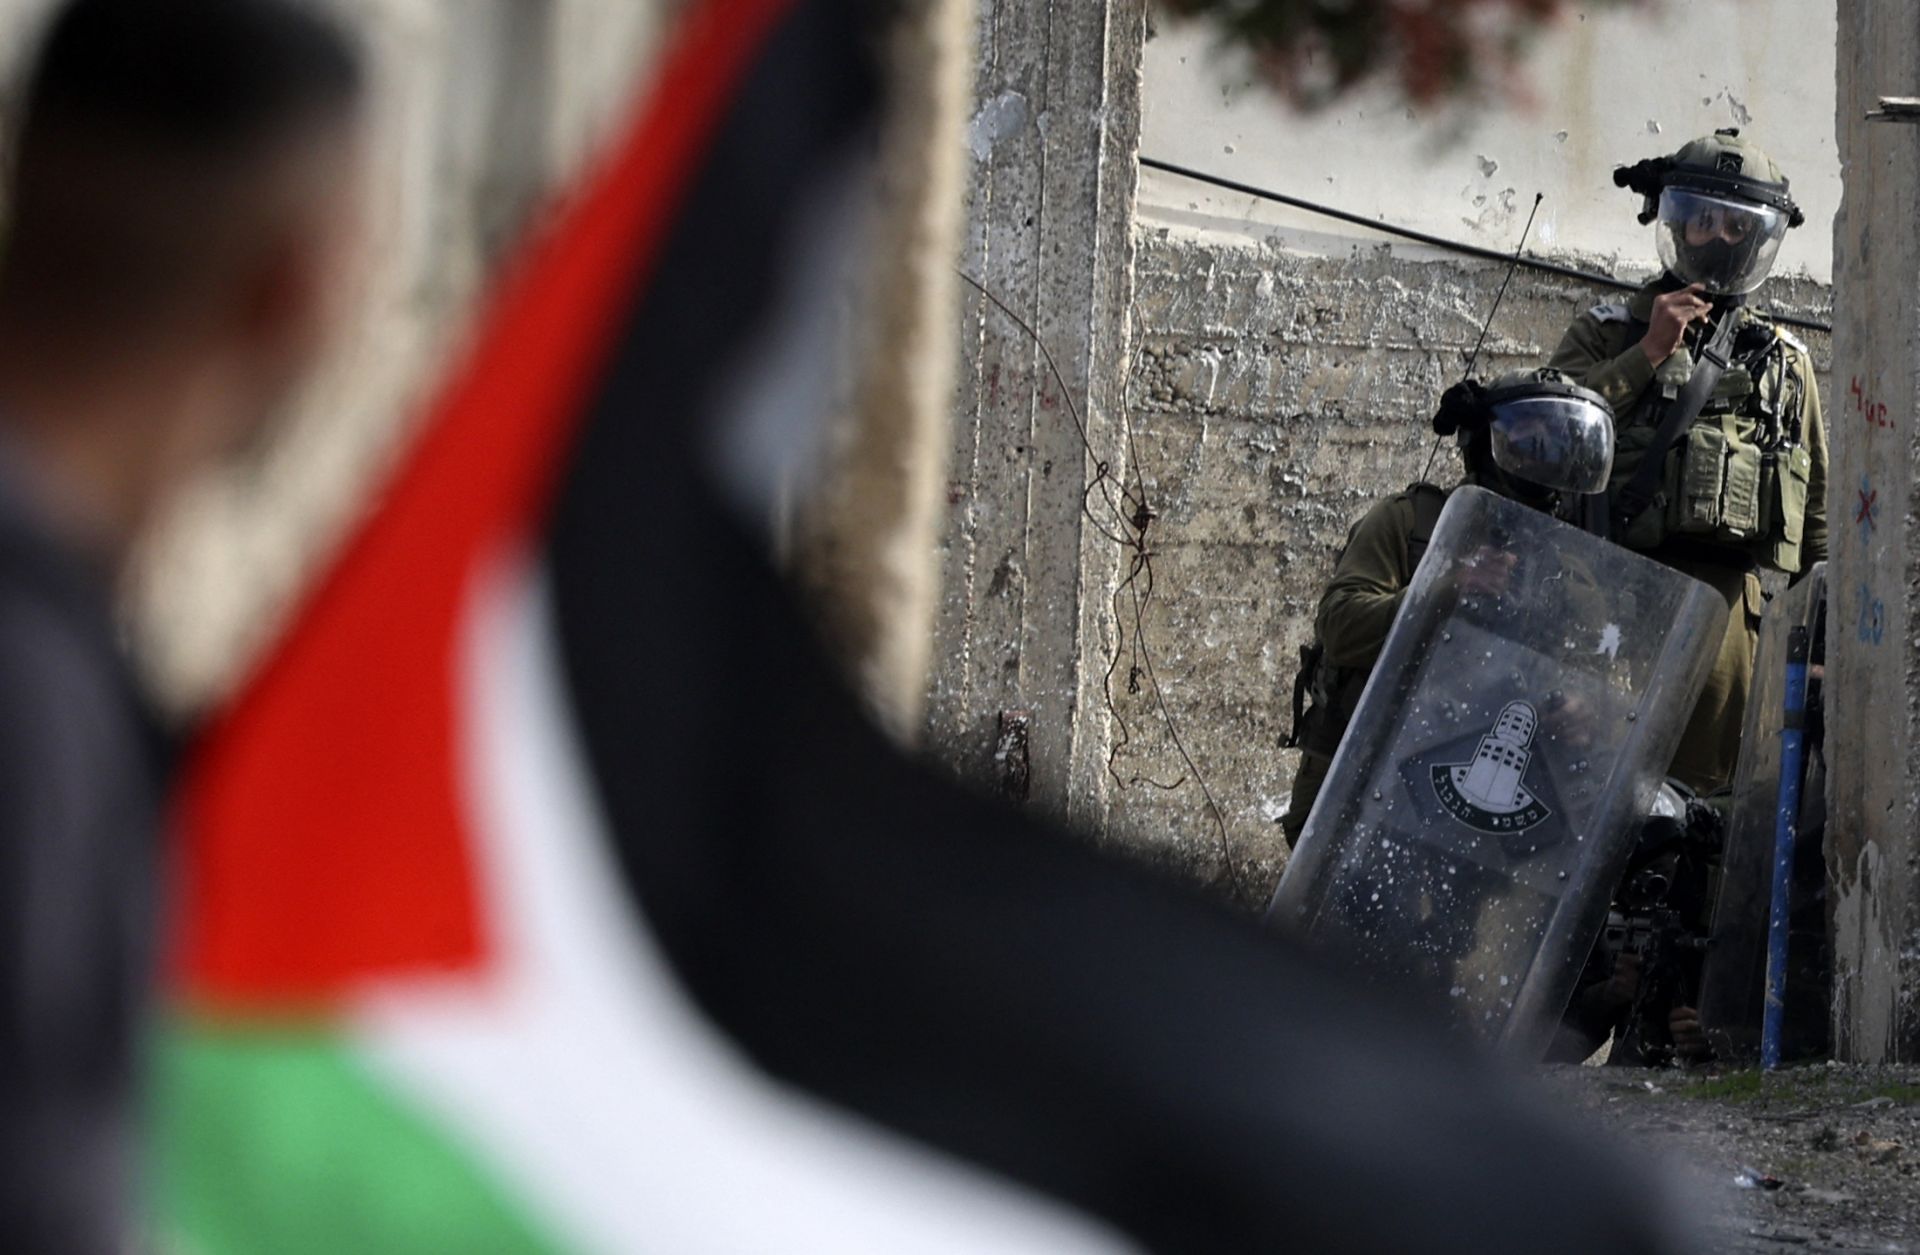 A Palestinian demonstrator waves a flag during confrontations with Israeli troops Jan. 6, 2023, in the West Bank village of Kfar Qaddum, near the Jewish settlement of Kedumim.